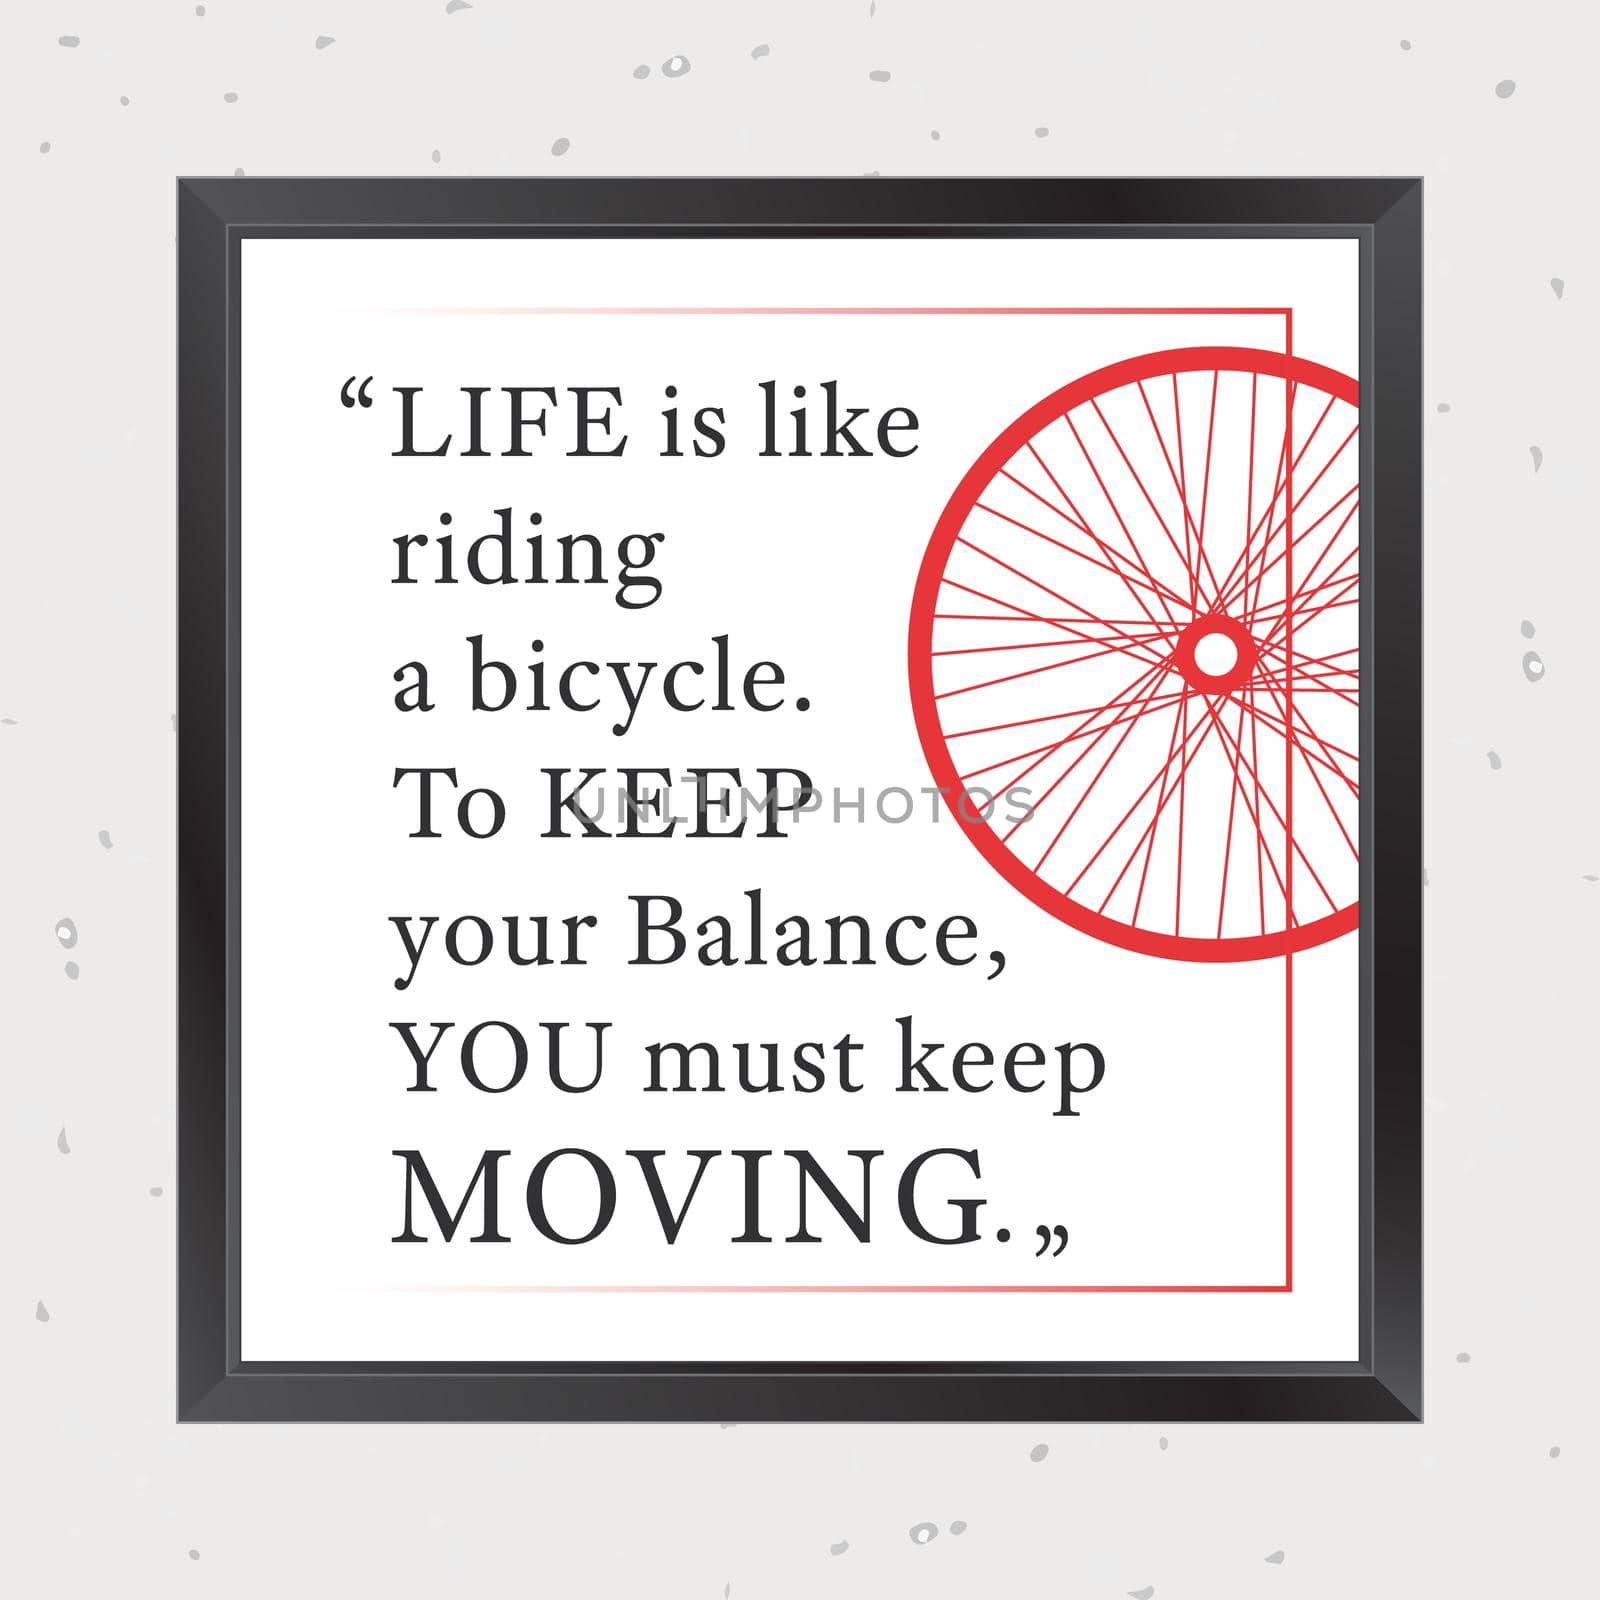 Quote Motivational Square. Inspirational Quote. Life is like riding a bicycle. To keep your balance, you must keep moving. Vector illustration.